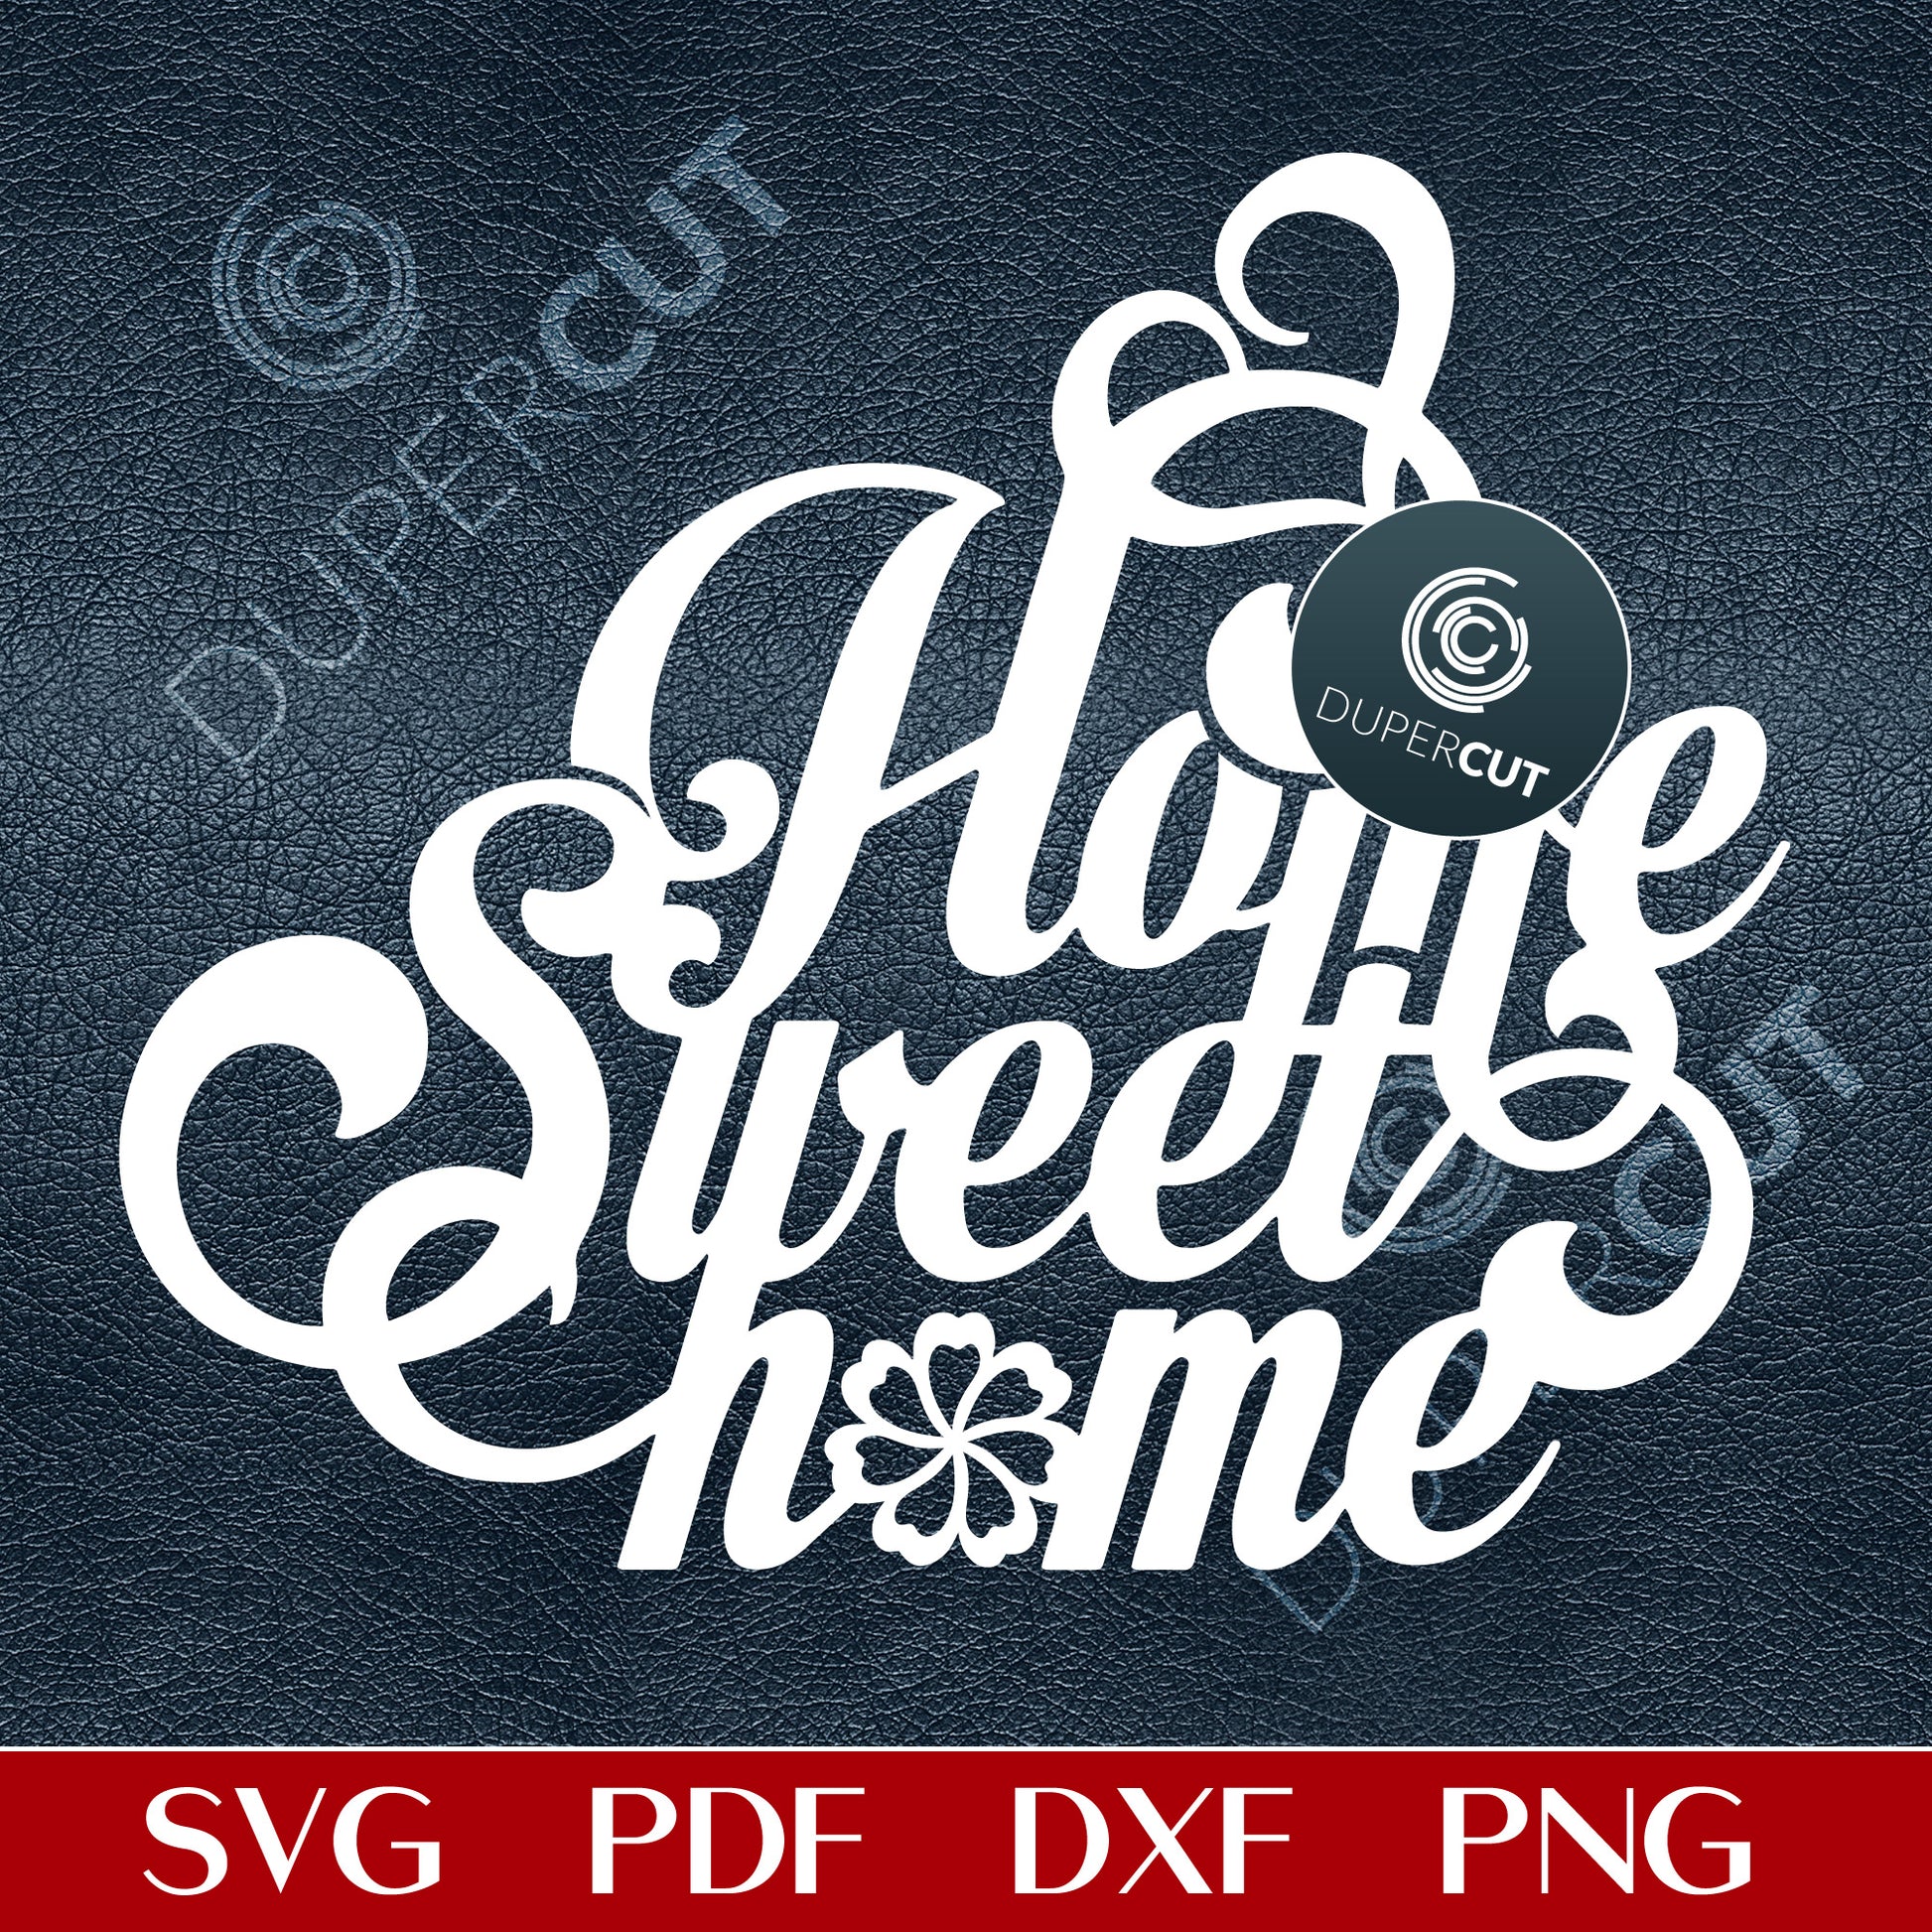 Home Sweet Home sign template - SVG PDF DXF vector laser cutting files for Glowforge, Cricut, Silhouette Cameo, CNC Plasma machines